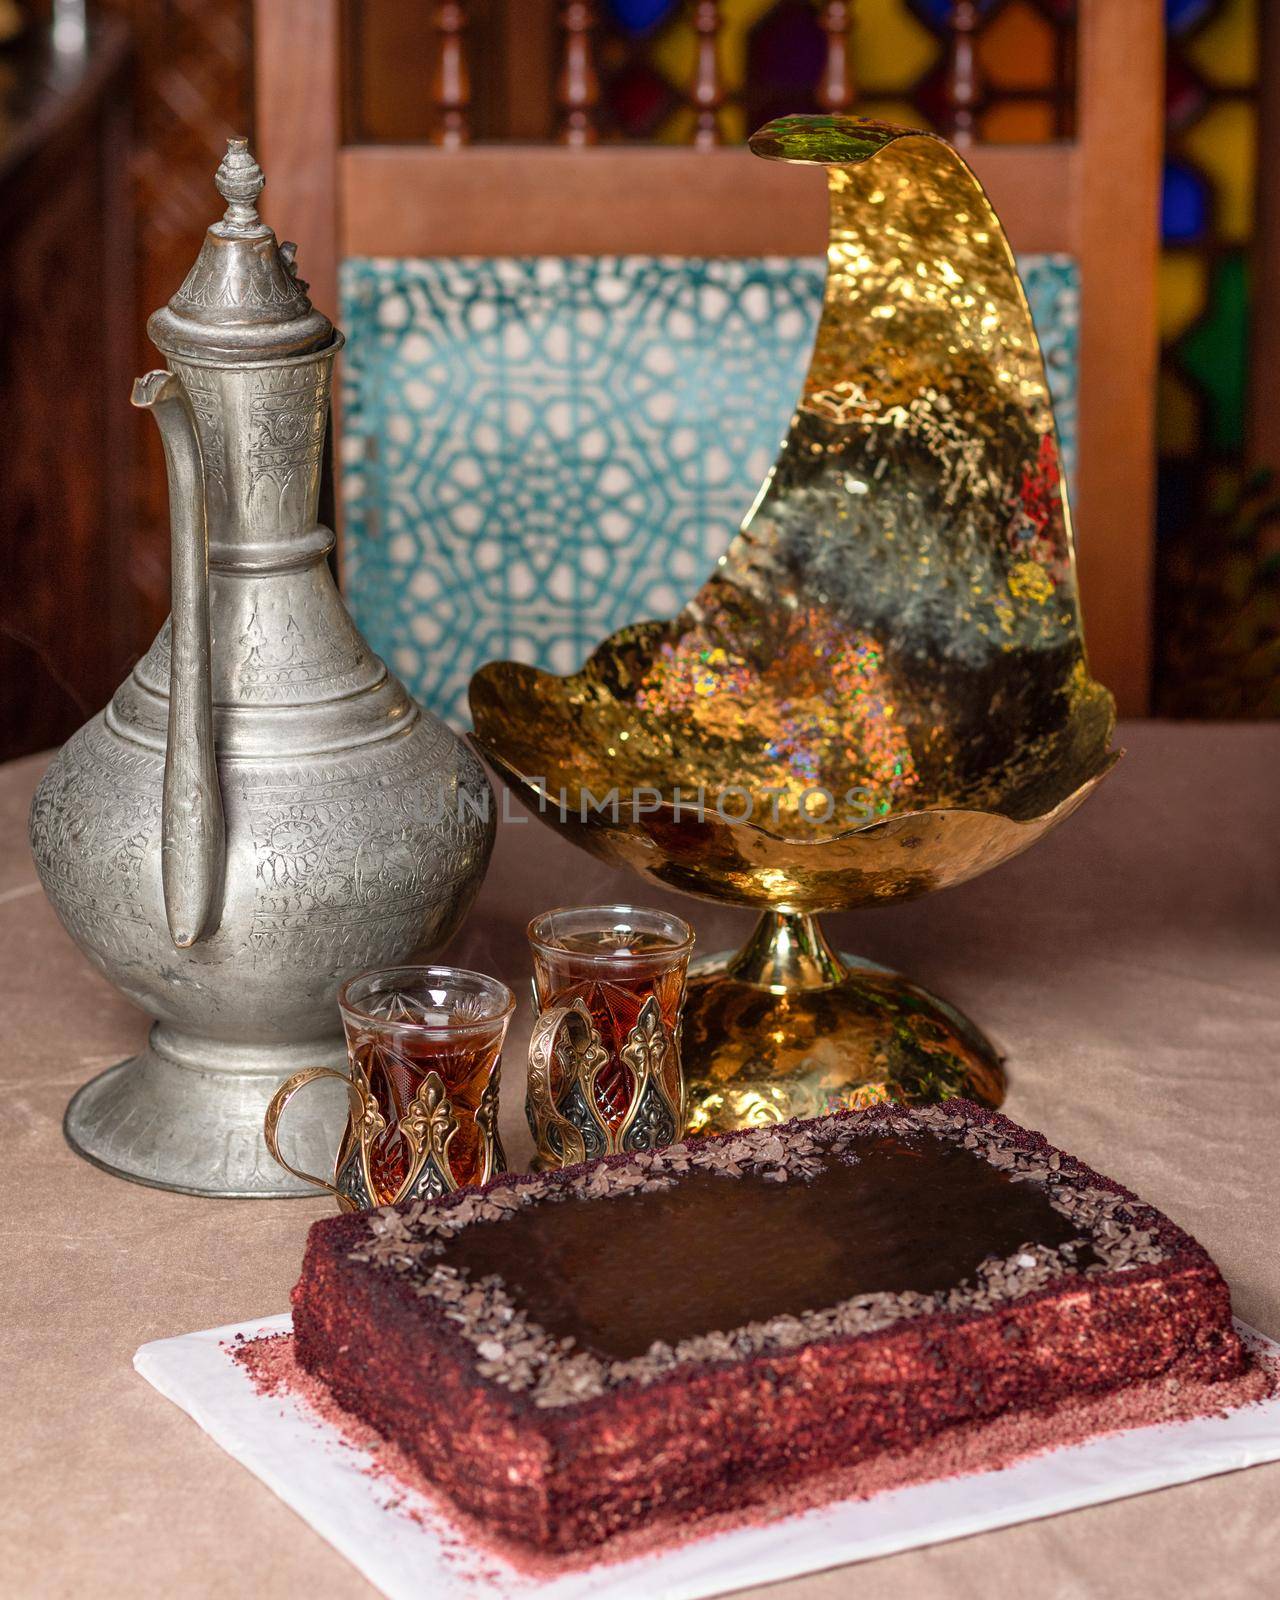 Arabic teapot glass and cake close up by ferhad